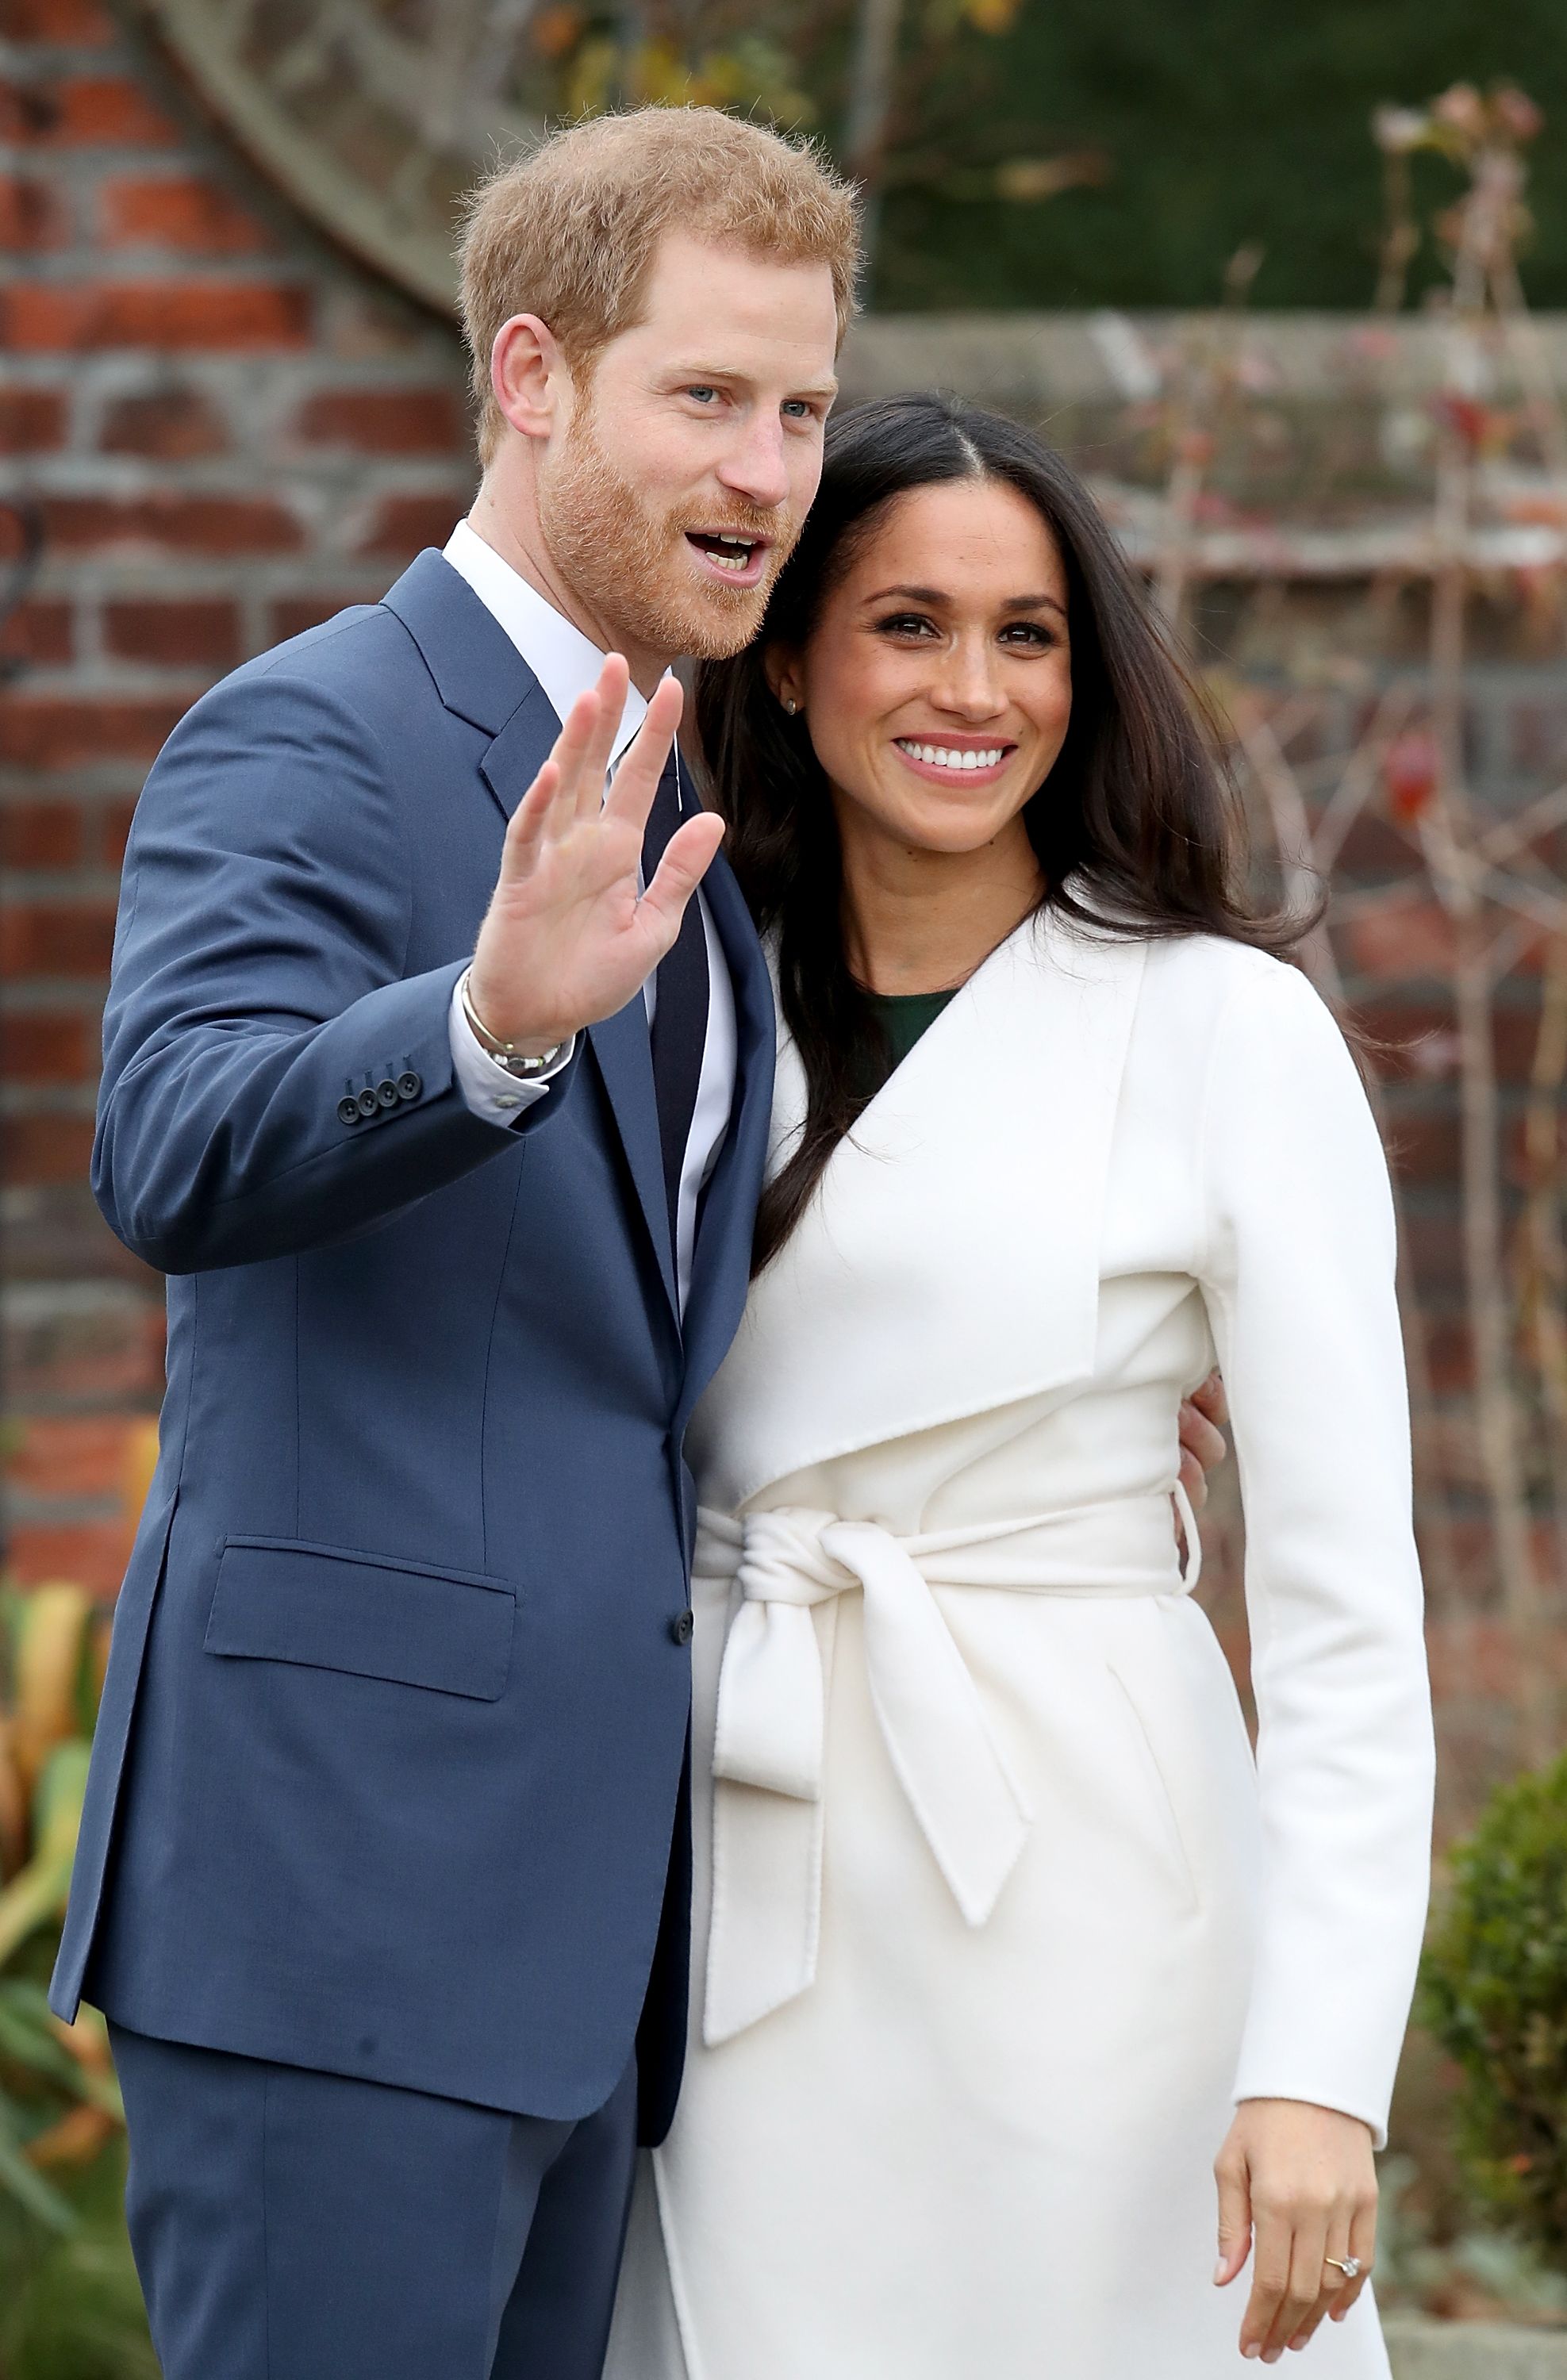 Prince Harry and Meghan Markle during an official photocall to announce their engagement on November 27, 2017, in London, England. | Source: Getty Images